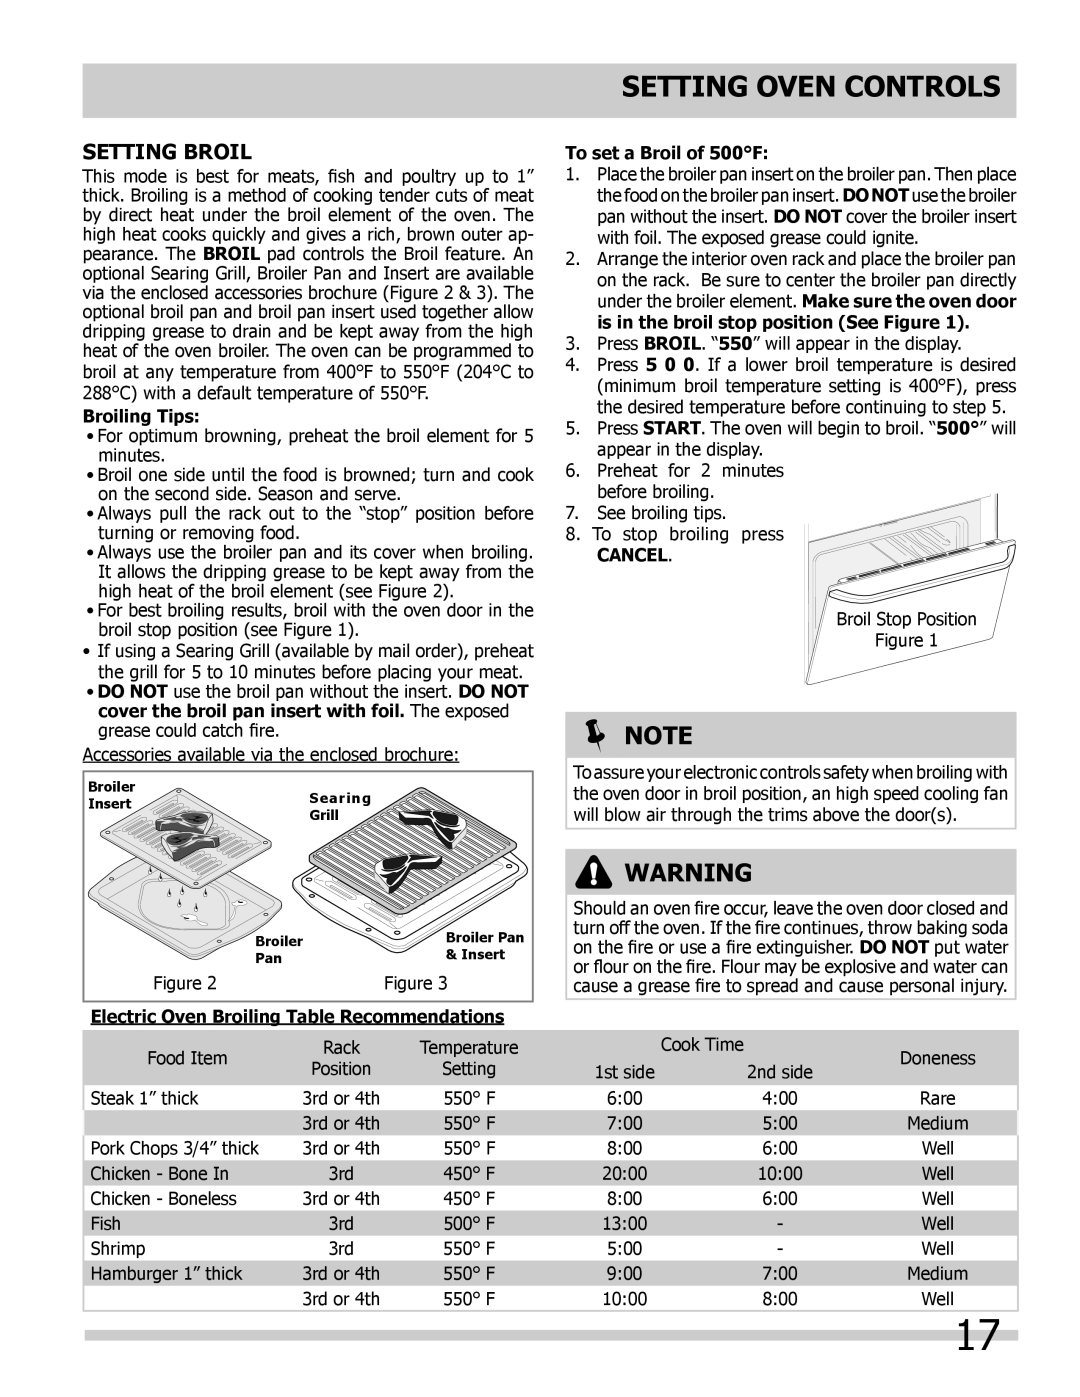 Frigidaire 318205302 manual Setting Broil, Setting Oven Controls,  Note, Broiling Tips, To set a Broil of 500F, Cancel 